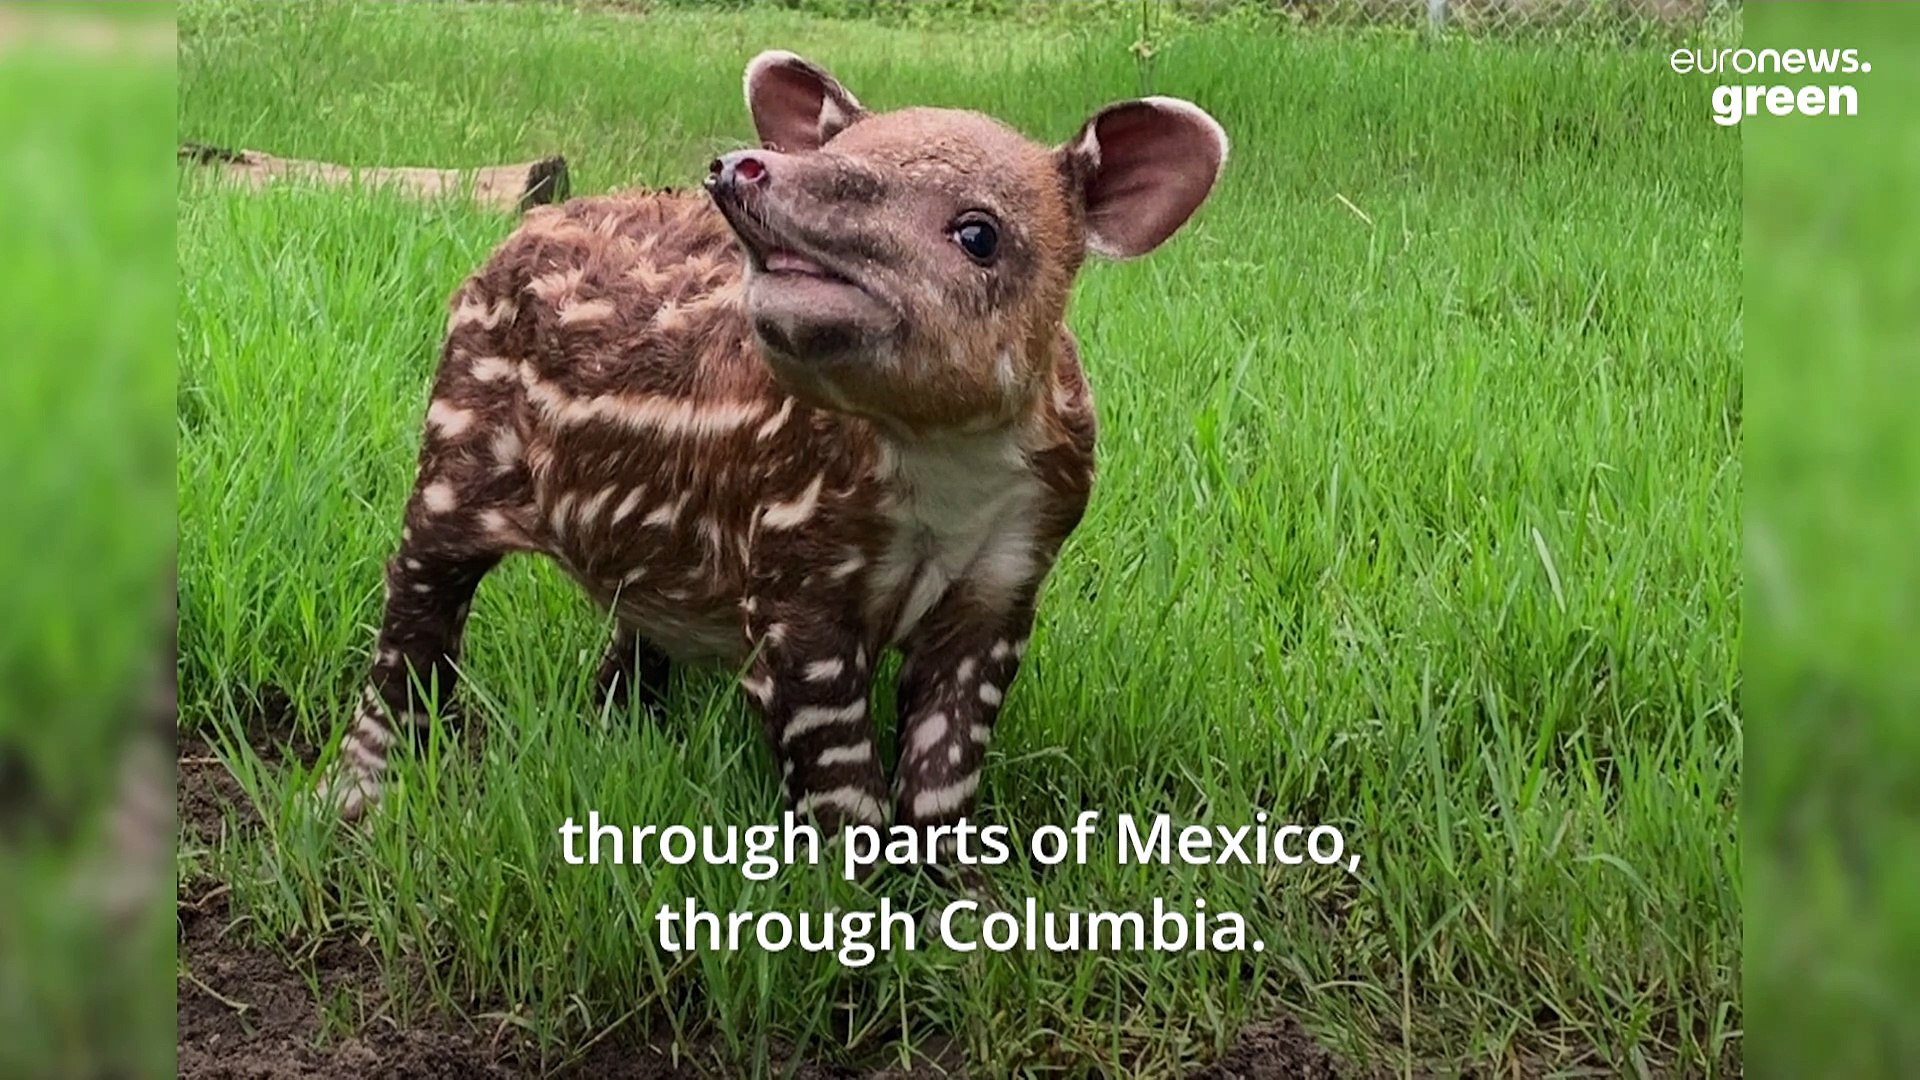 Meet the endangered baby tapir on an important mission - video Dailymotion